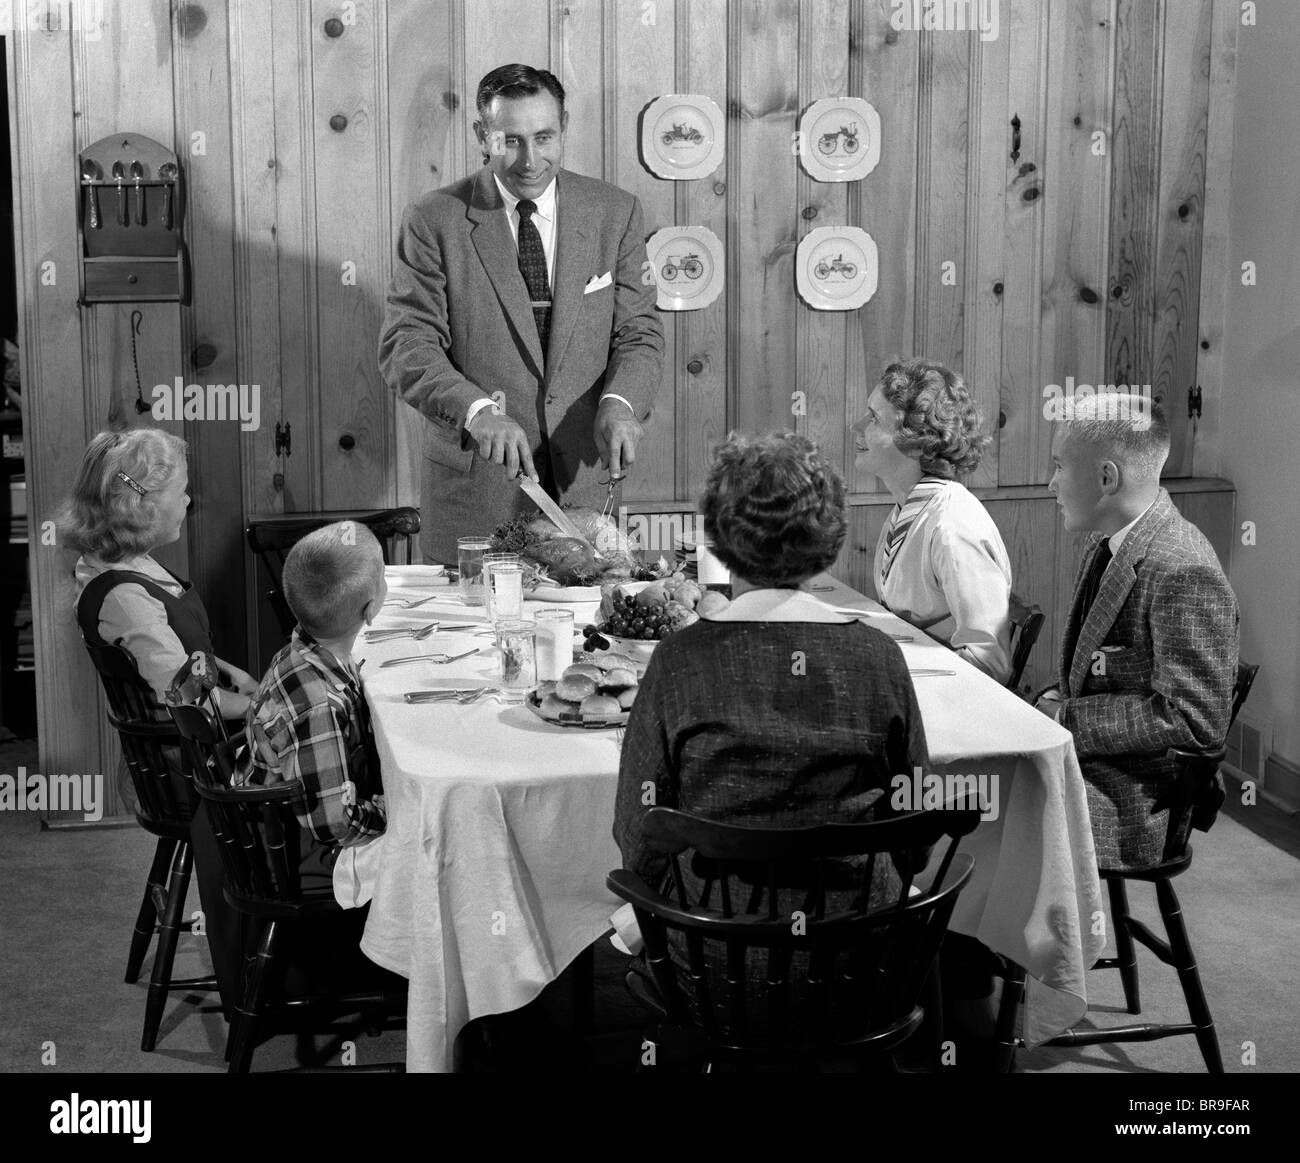 1950s FATHER STANDING AT DINNER TABLE KNOTTY PINE PANELED DINING ROOM READY TO SERVE FAMILY AND CARVE TURKEY Stock Photo